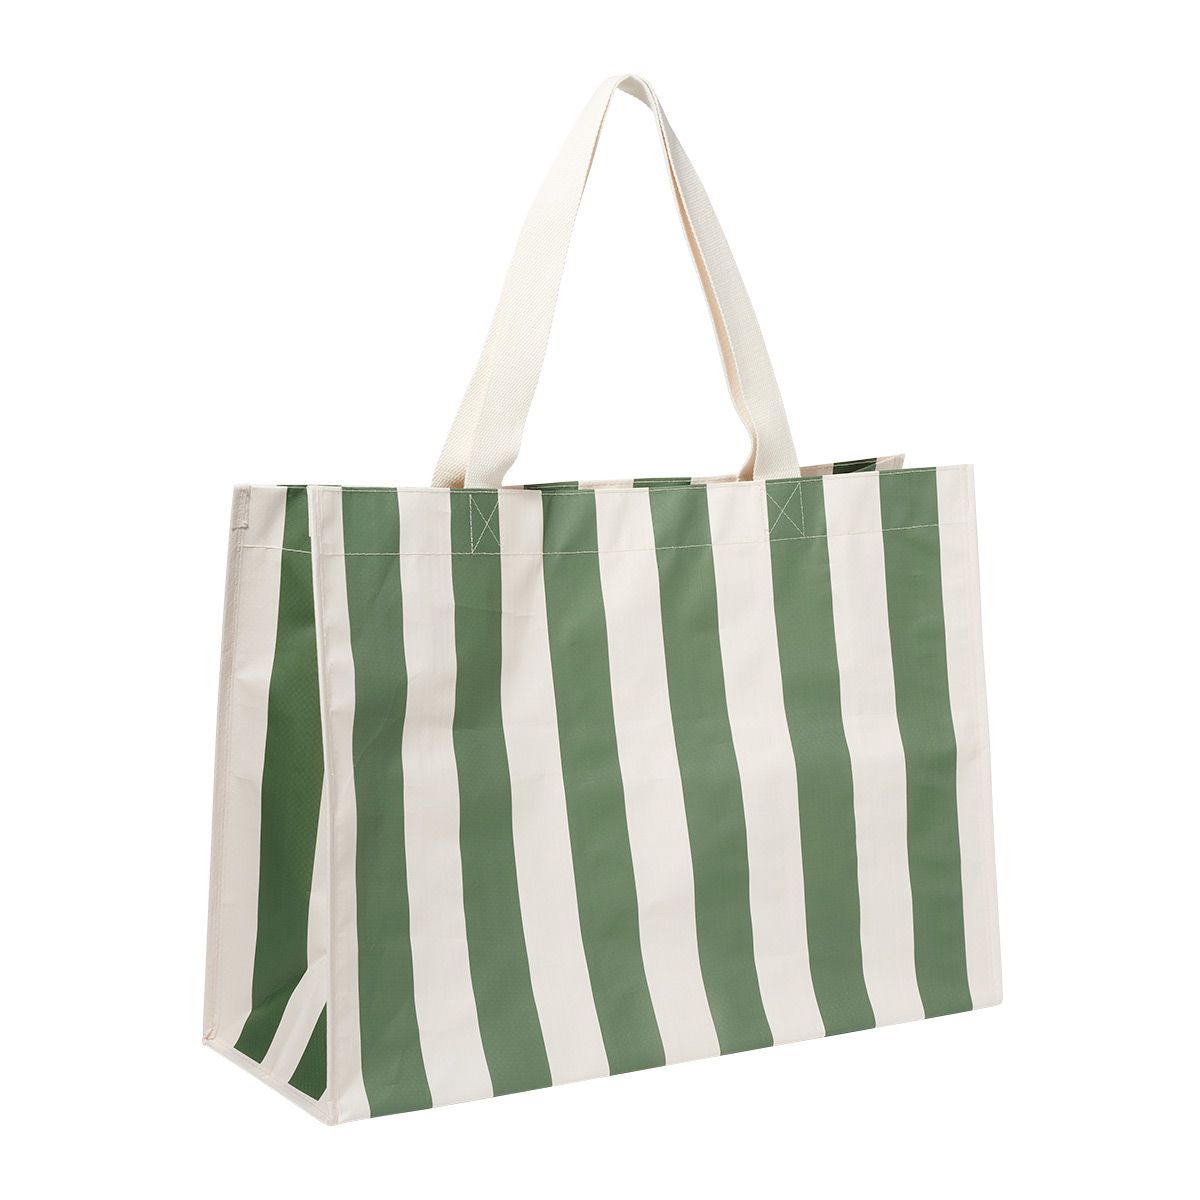 SUNNYLiFE Carryall Beach Bag | The Container Store